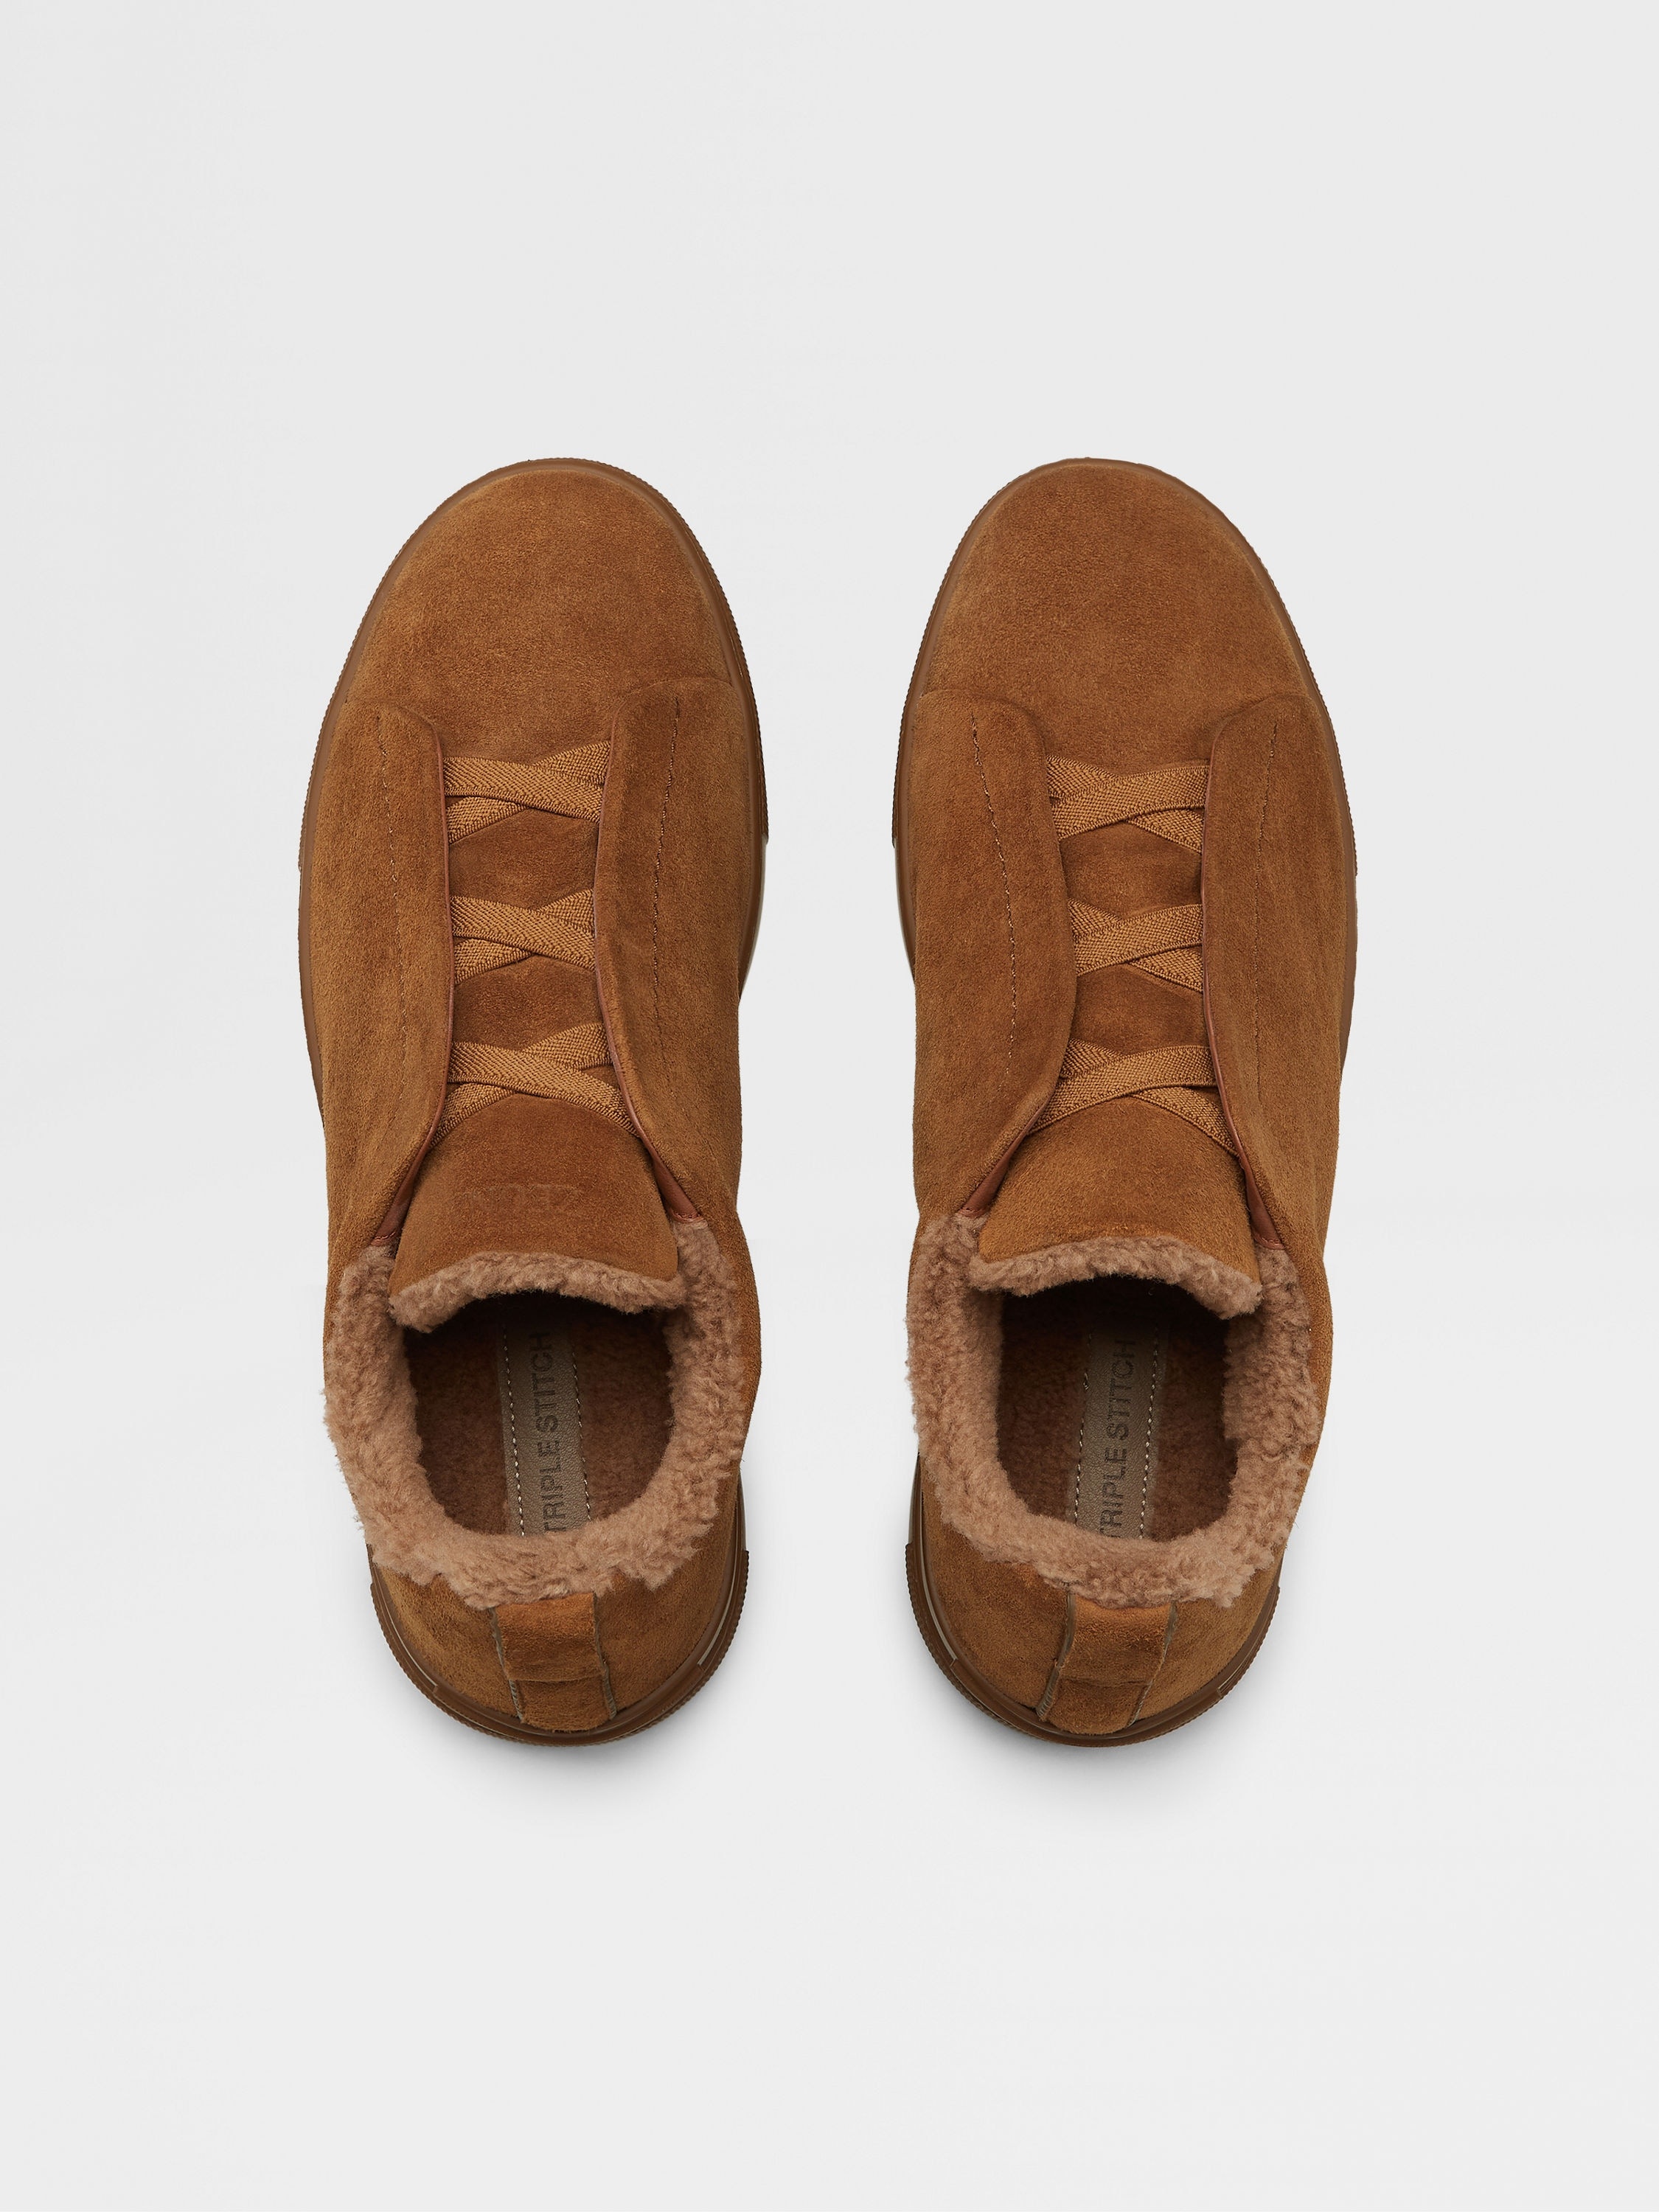 LIGHT BROWN SUEDE TRIPLE STITCH™ SNEAKERS - 3